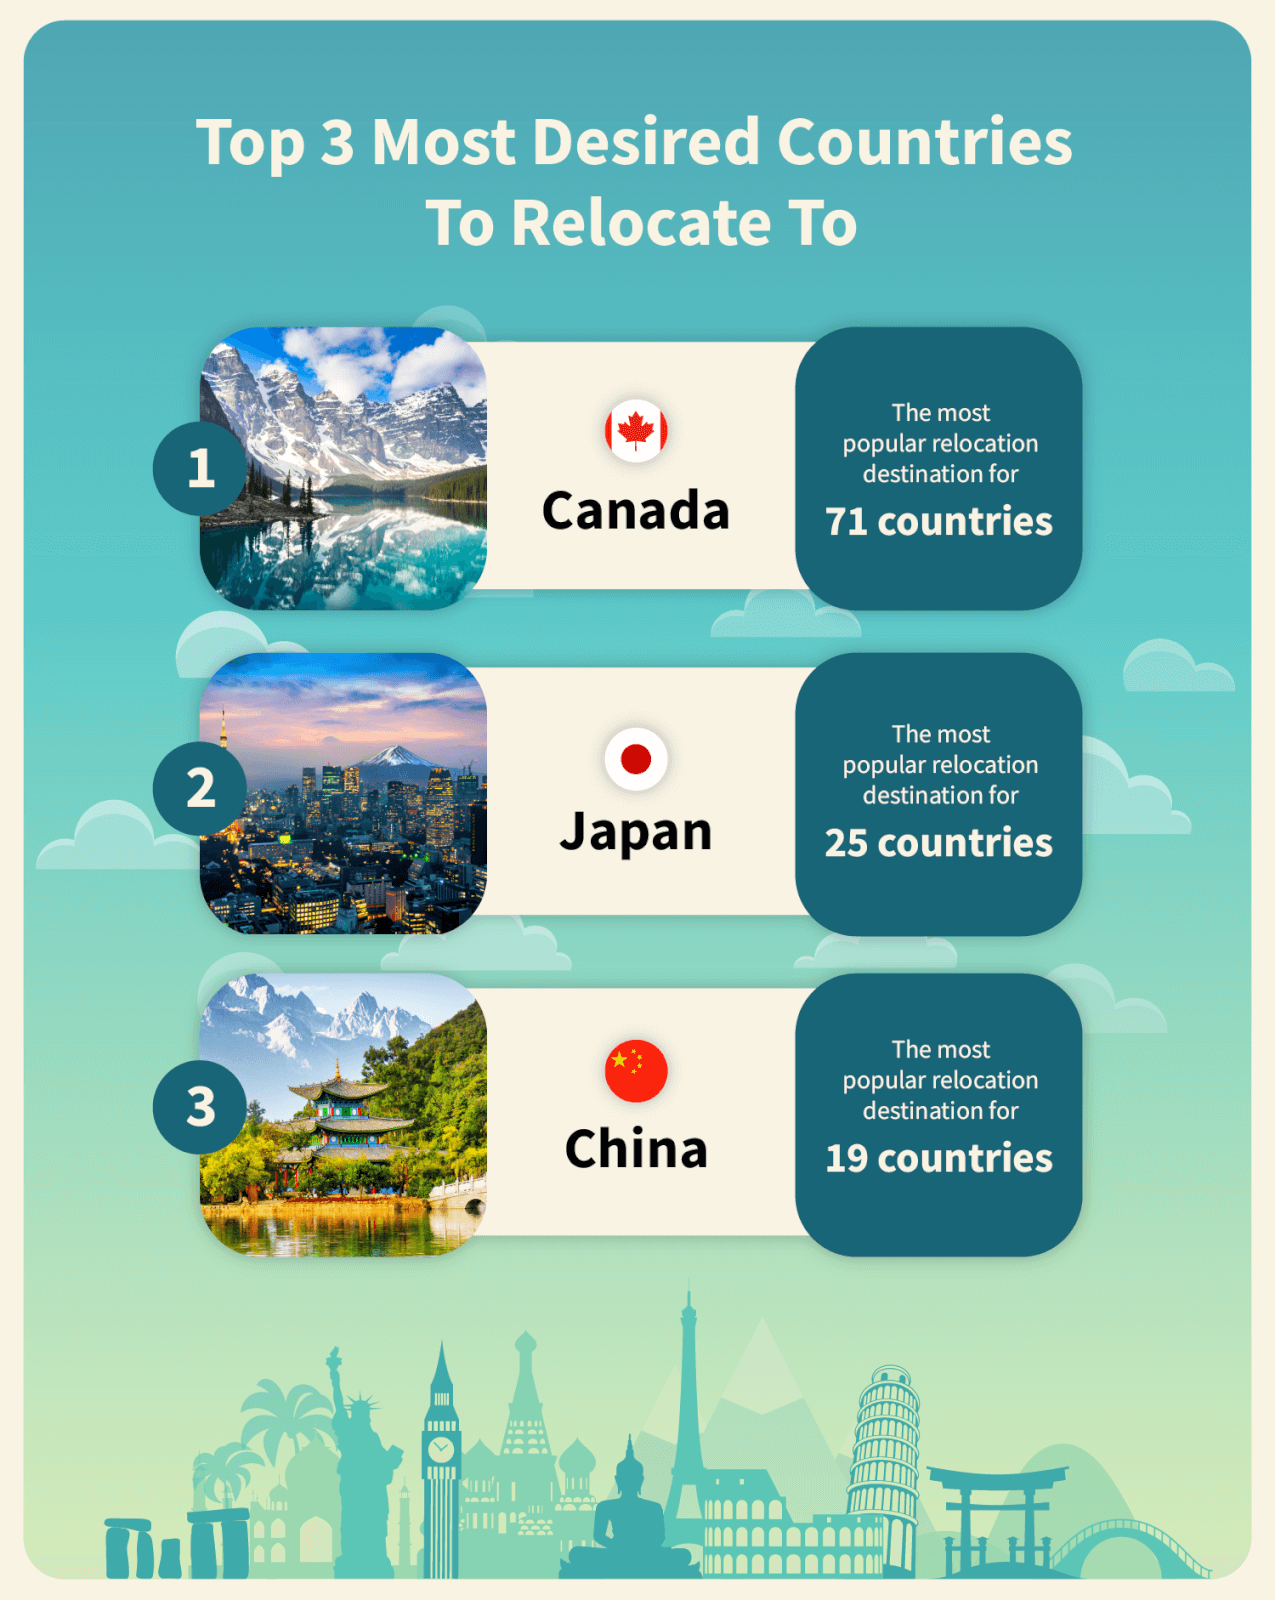 The top three most desired countries to relocate to are Canada, Japan and China.